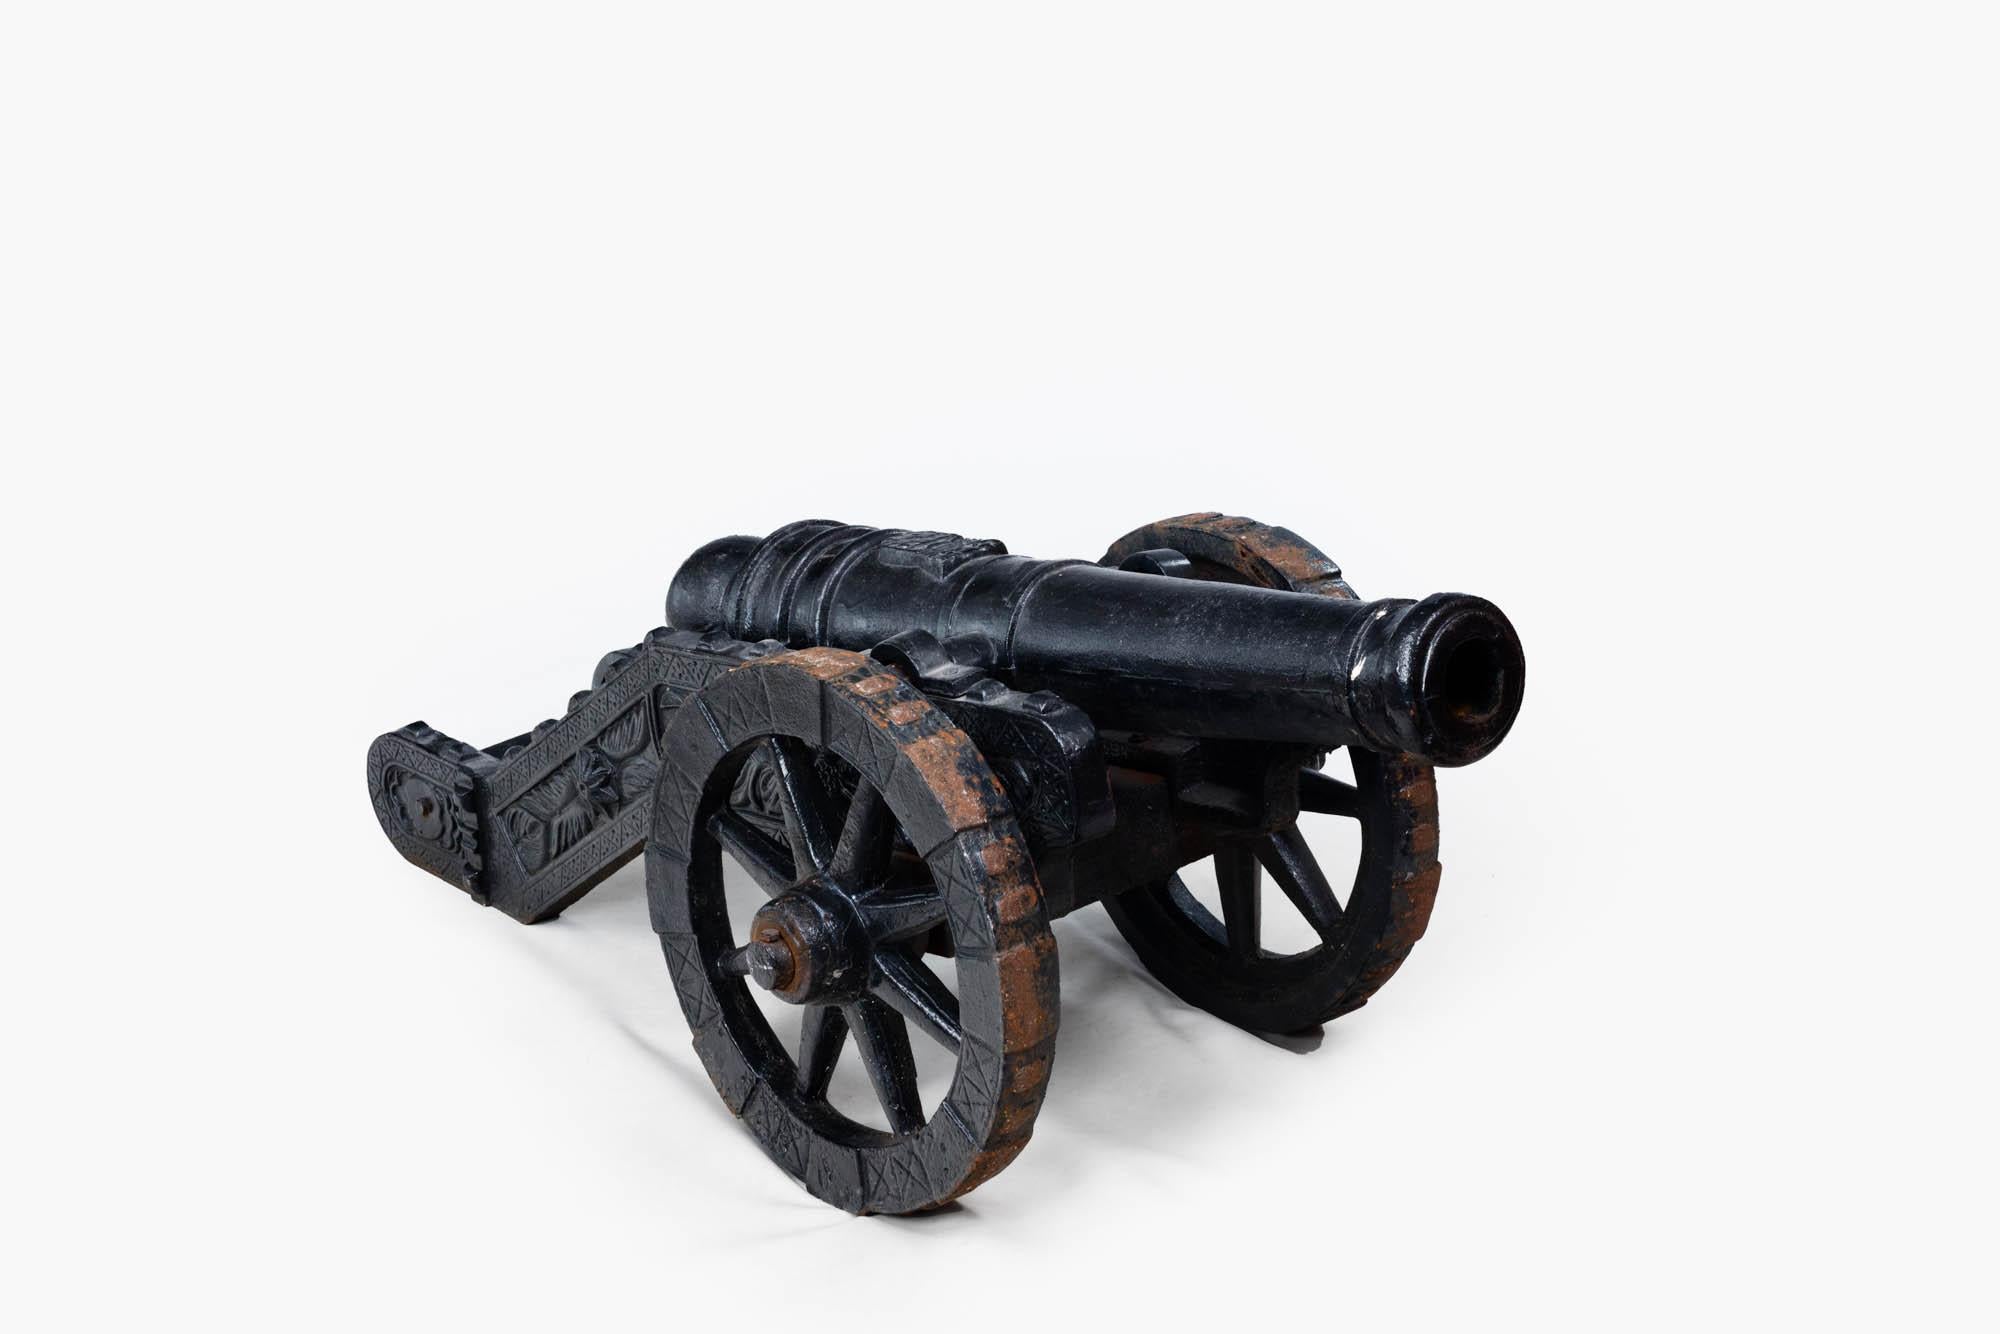 Late 19th century pair of decorative cast iron signaling cannons. Sitting on Cast trucks with embossed decoration having spoked cast wheels. The wheels have raised rectangular iron treads, and they are held to the axles by small metal pins.